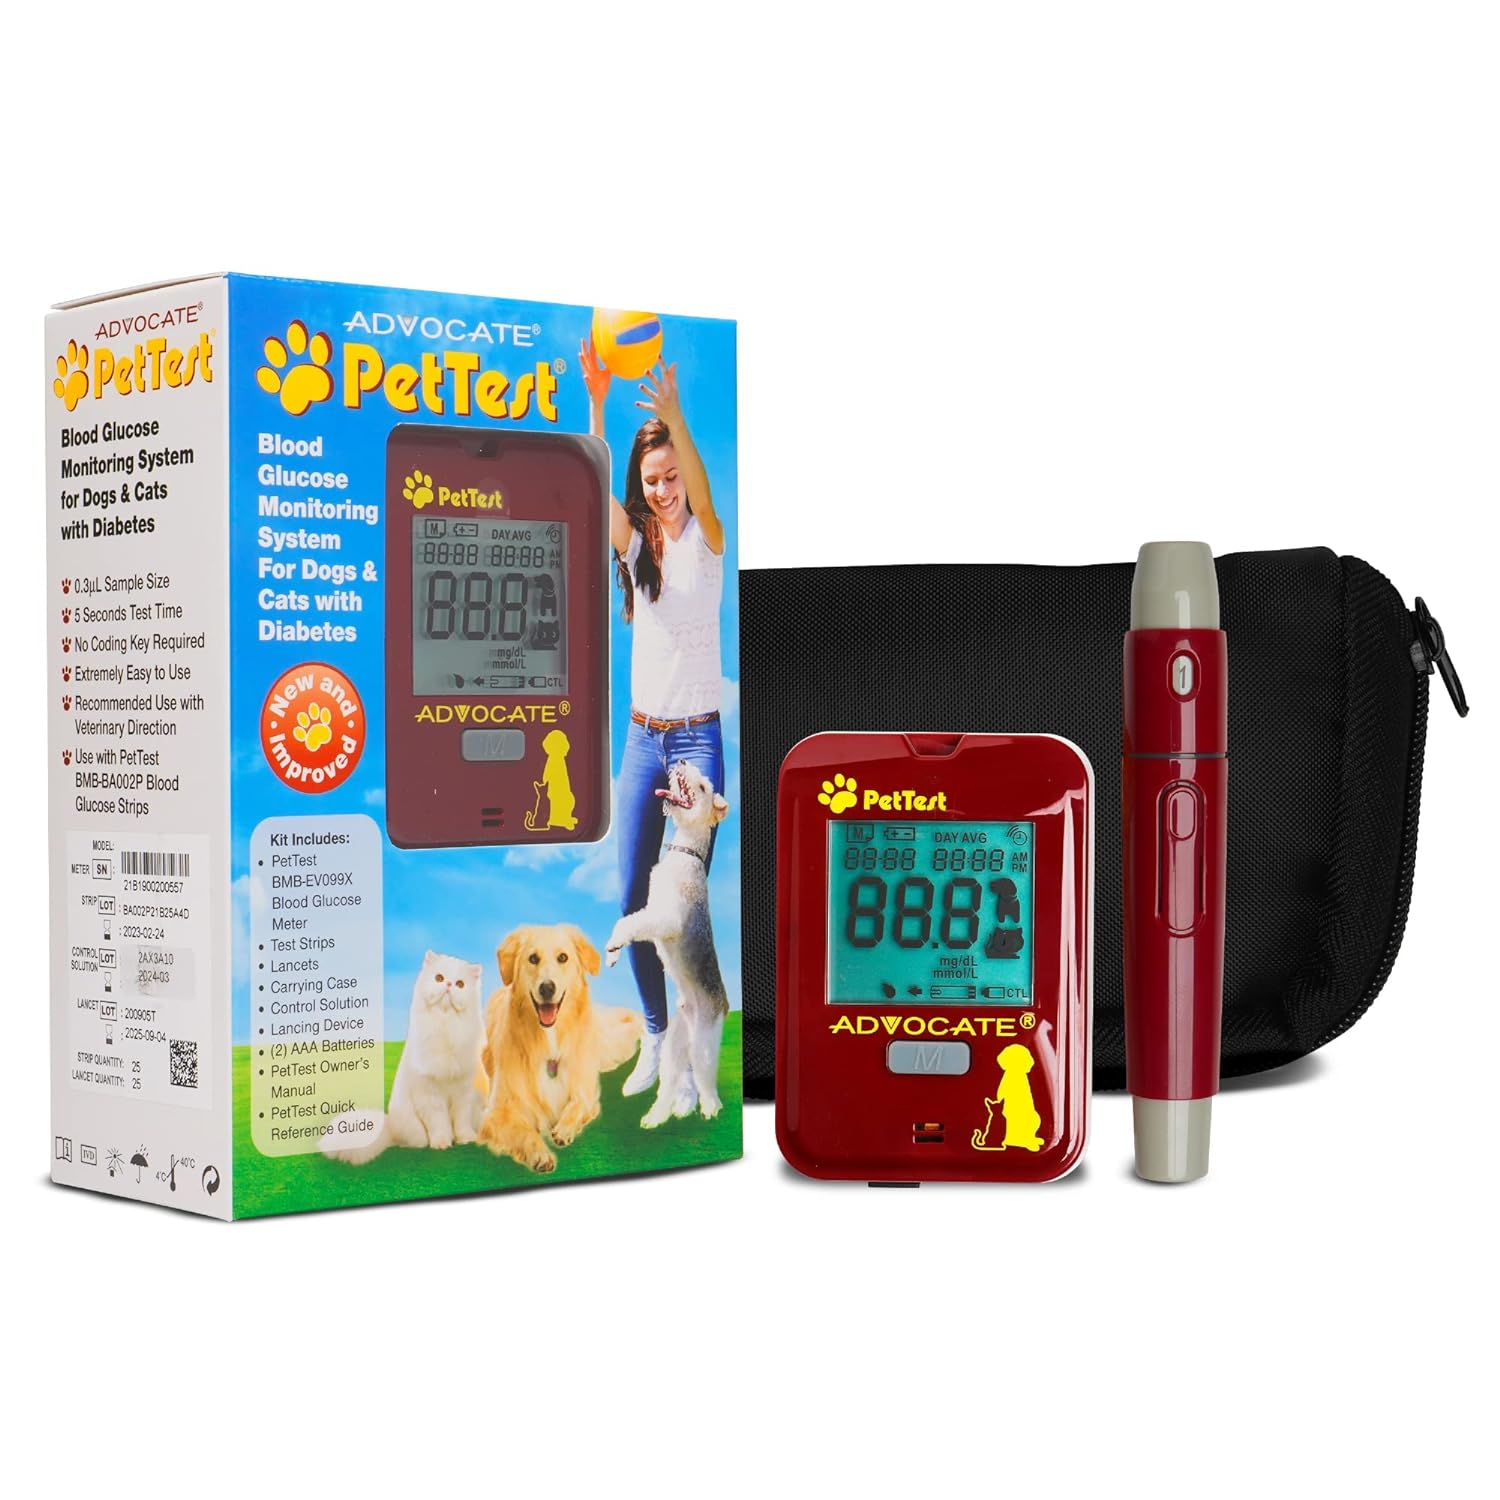 pettest glucose monitoring system blood sugar check kit for dogs cats full kit includes 25 test strips 25 lancets red do